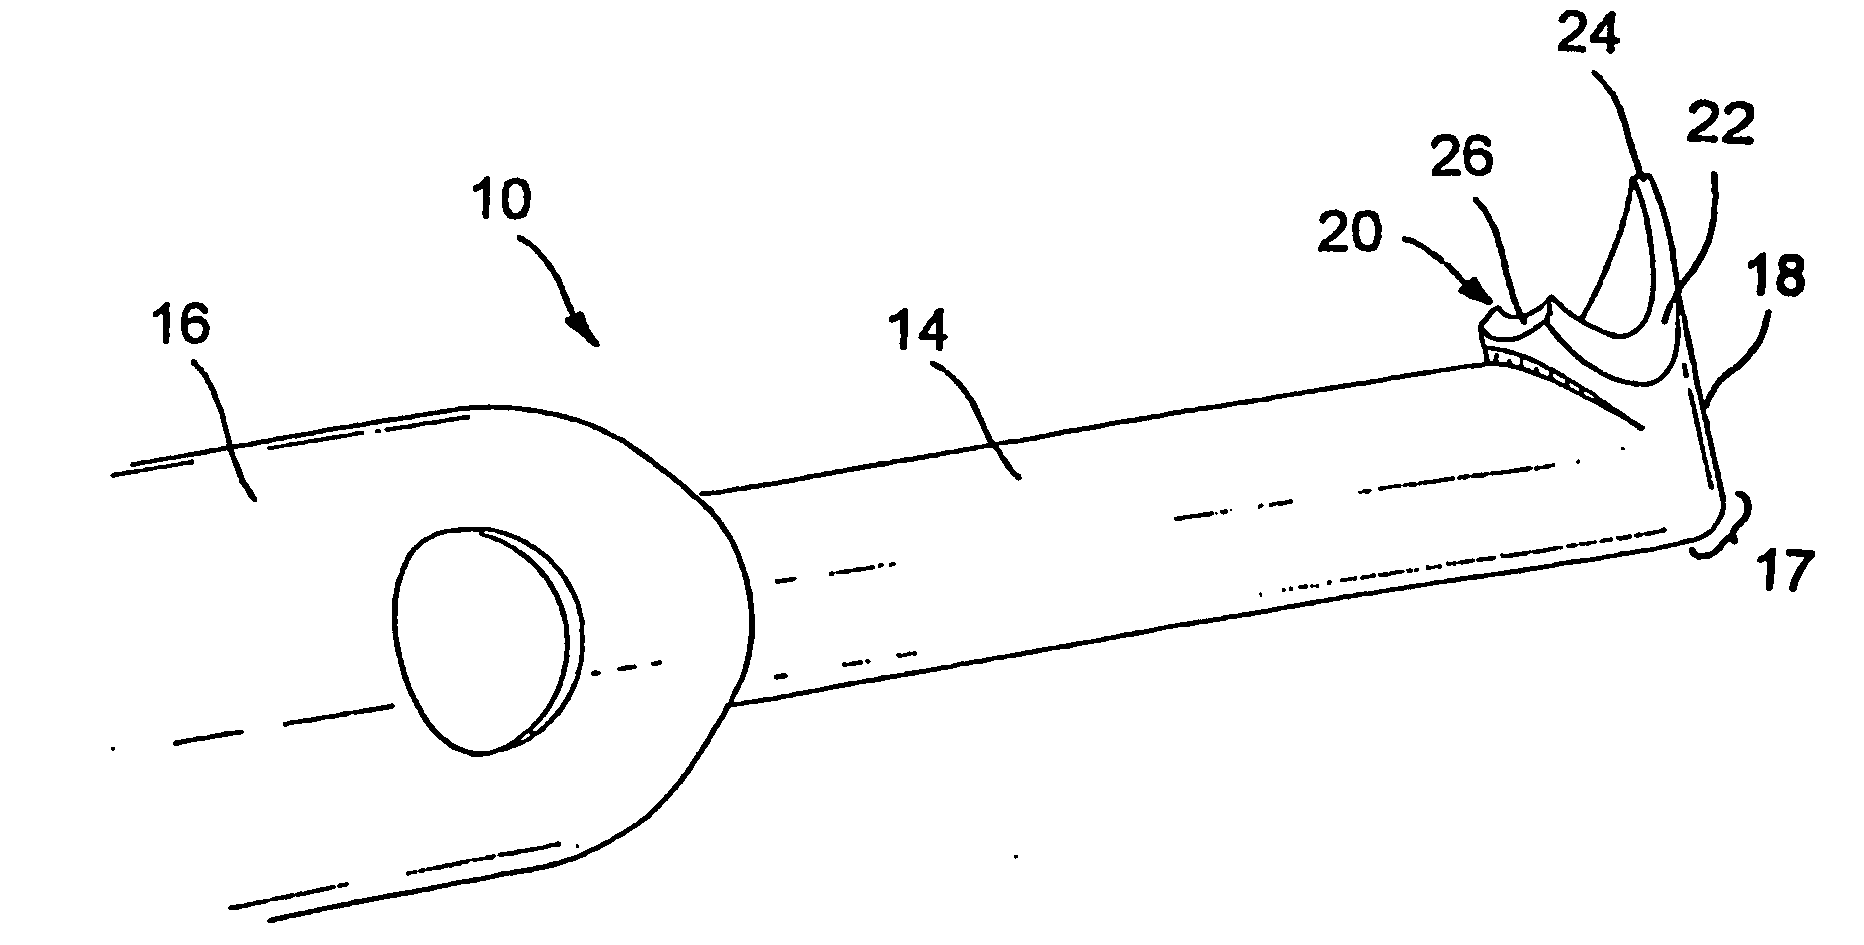 Tubular Cutter Device And Methods For Cutting And Removing Strips Of Tissue From The Body Of A Patient